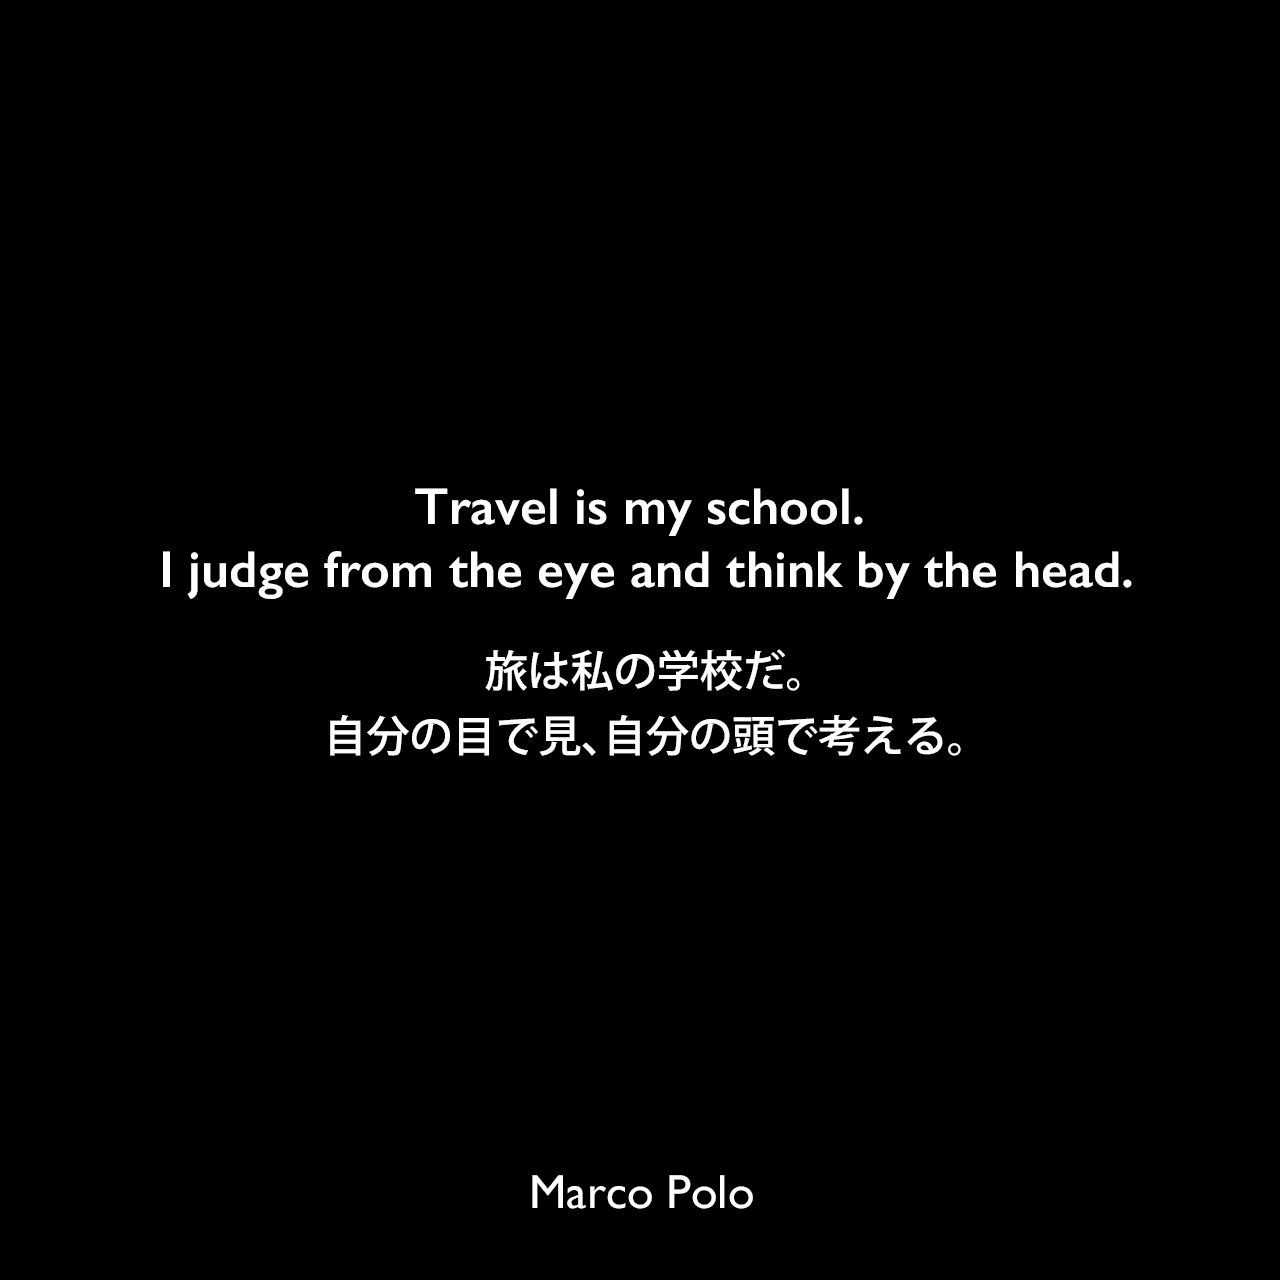 Travel is my school. I judge from the eye and think by the head.旅は私の学校だ。自分の目で見、自分の頭で考える。Marco Polo